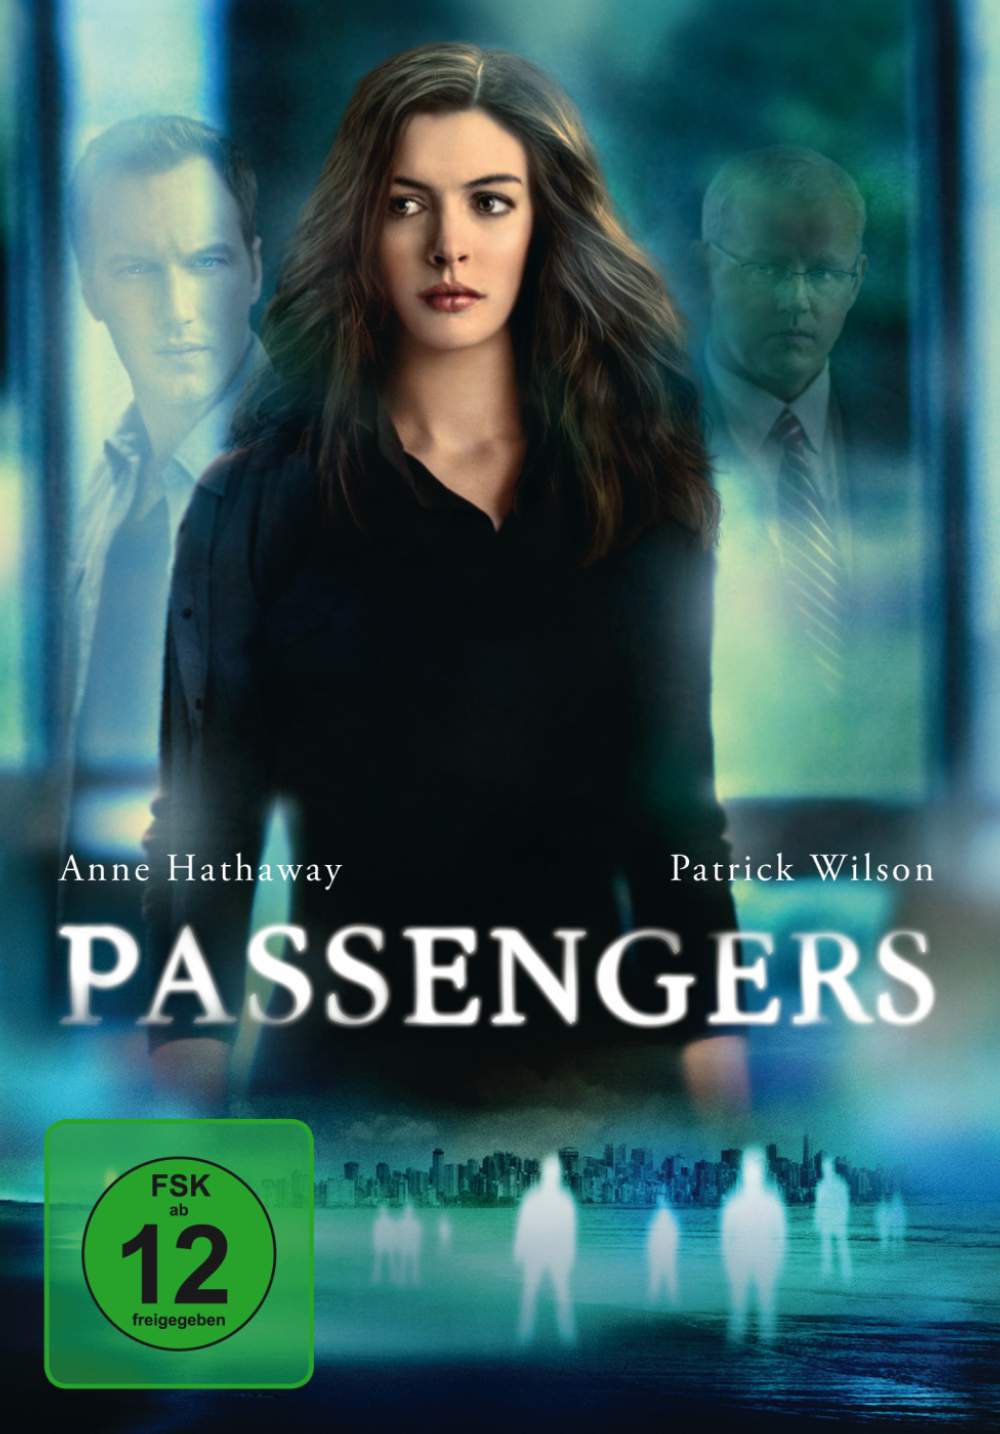 the passengers free download